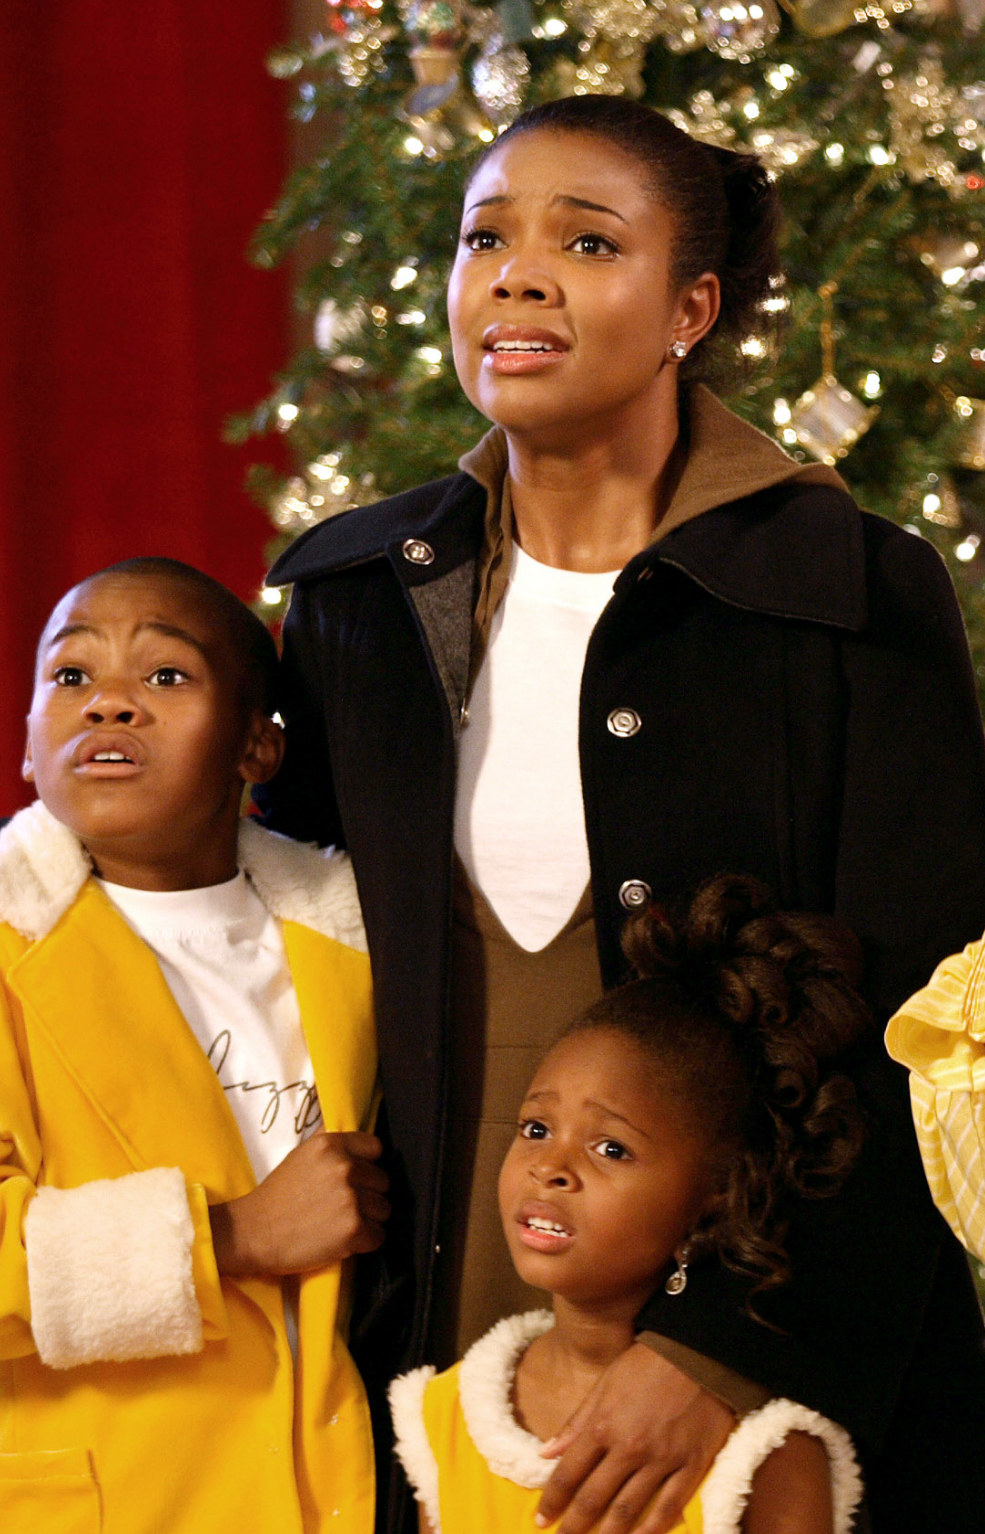 Union standing with a worried expression on her face while holding onto her two kids in the film